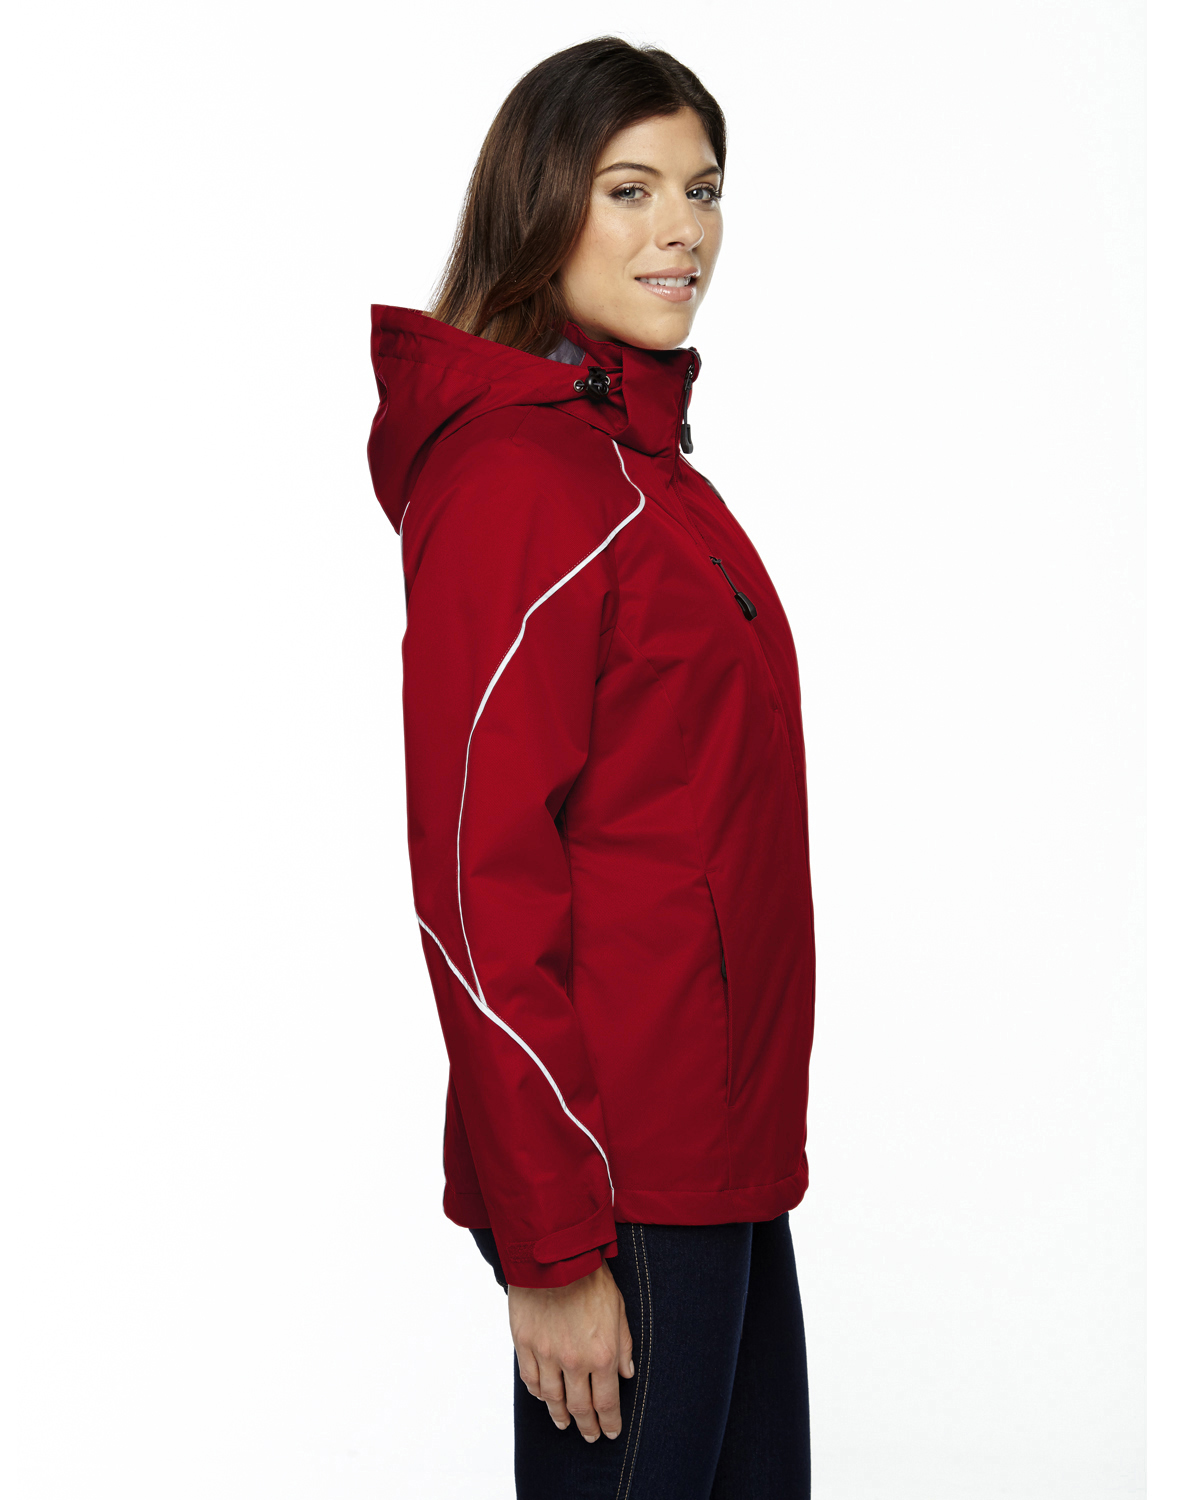 Ladies' Angle 3-in-1 Jacket with Bonded Fleece Liner - CLASSIC RED - XS - image 3 of 3